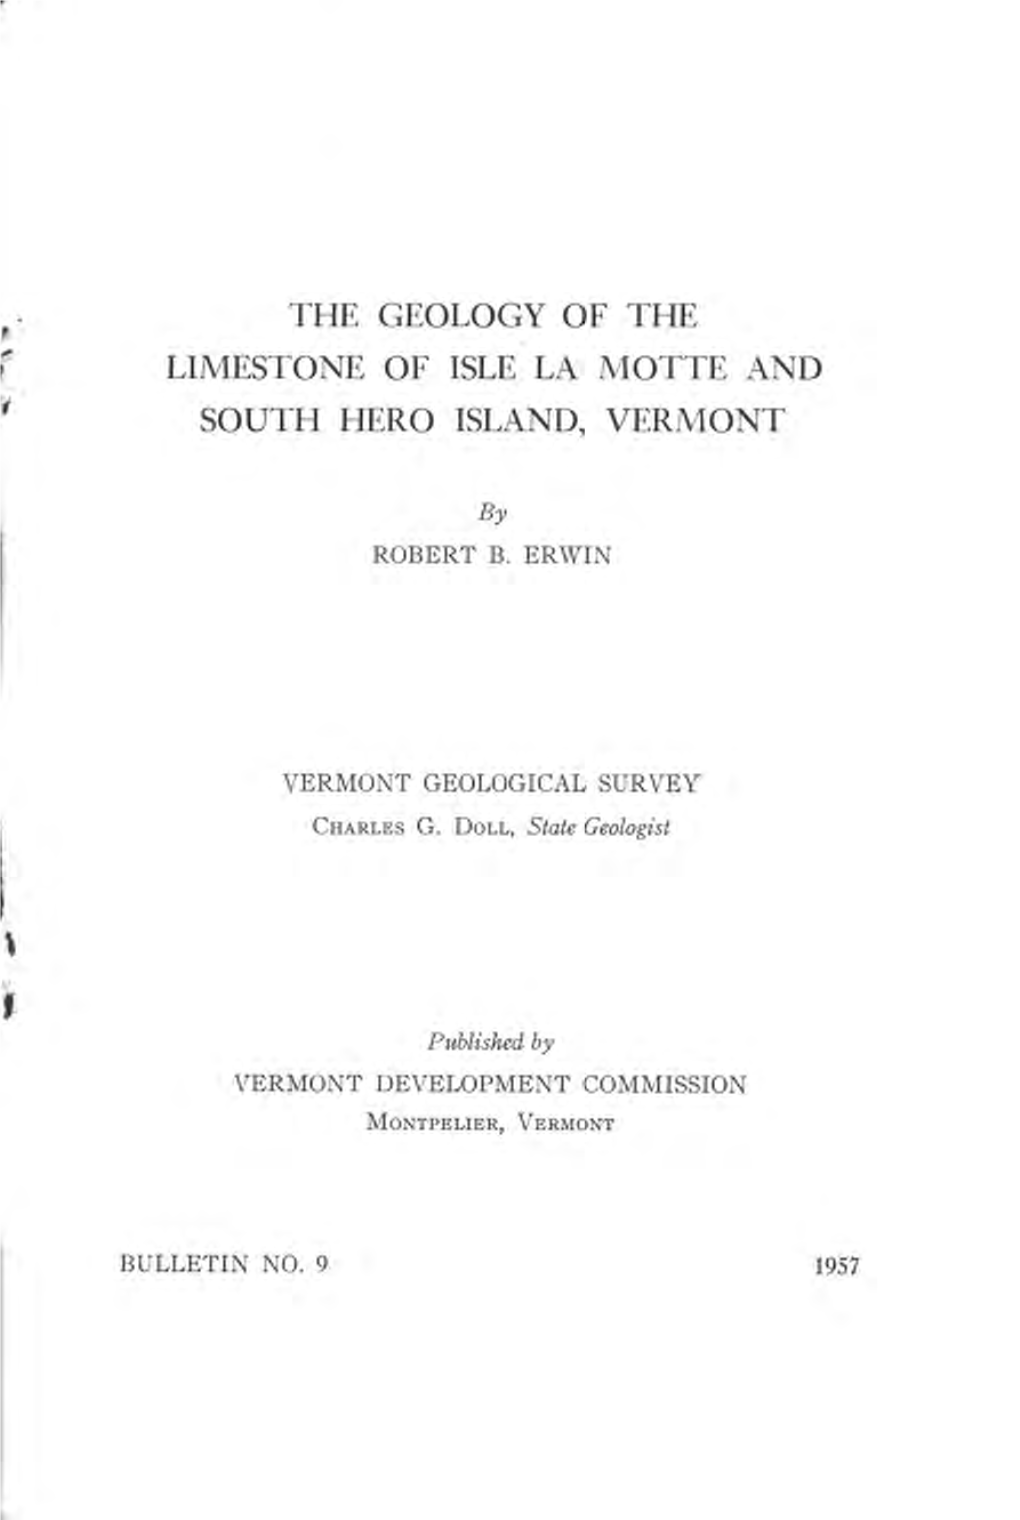 The Geology of the Limestone of Isle La Motte and South Hero Island, Vermont